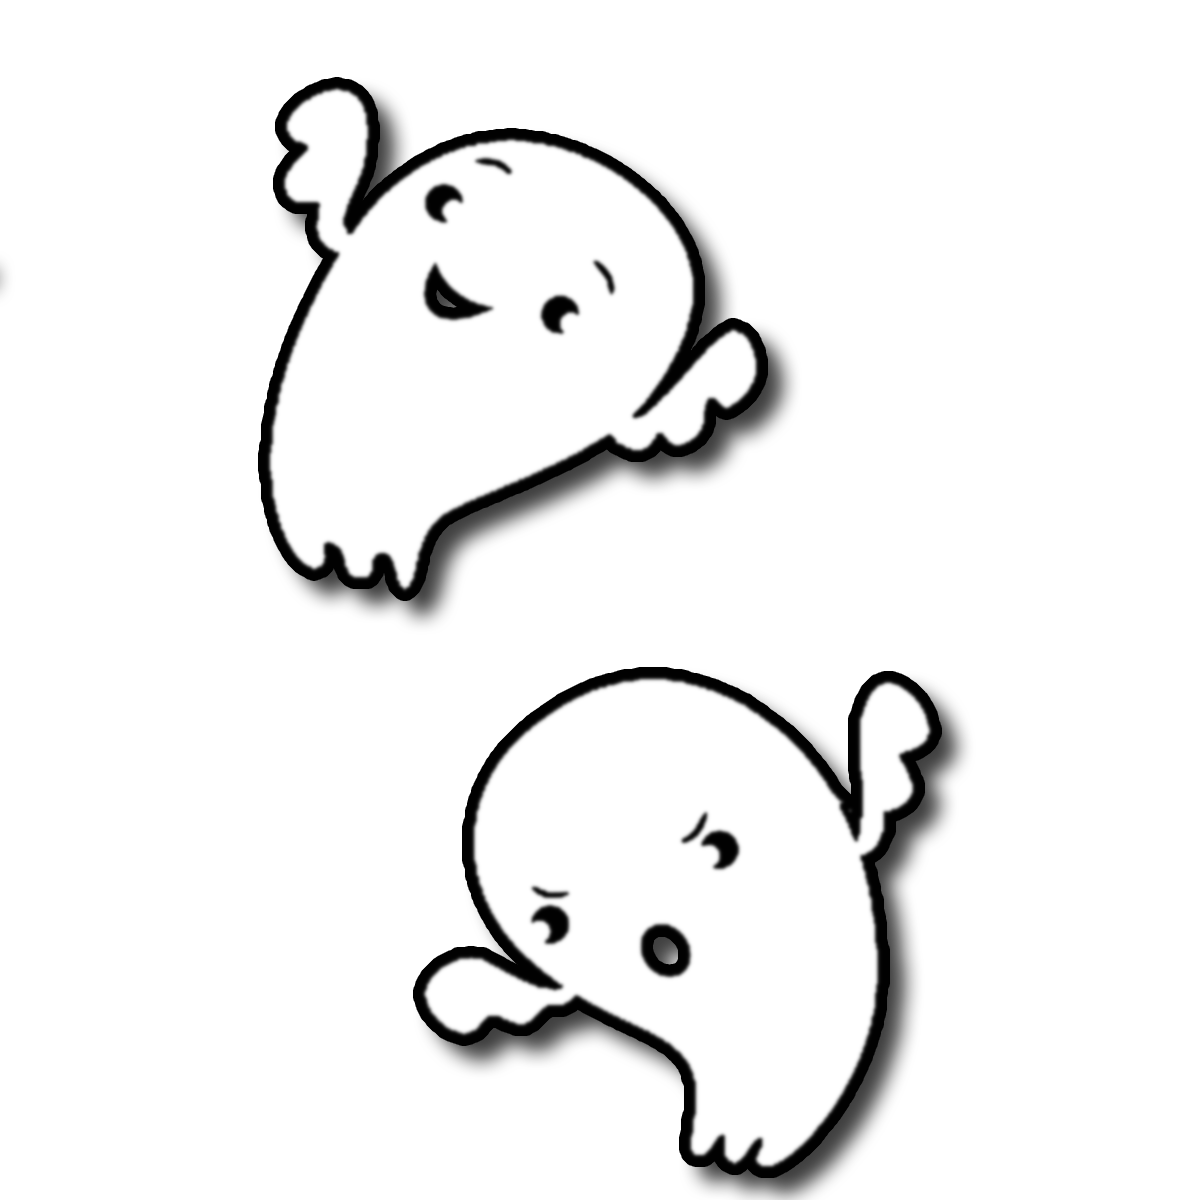 clipart ghost pictures - photo #35